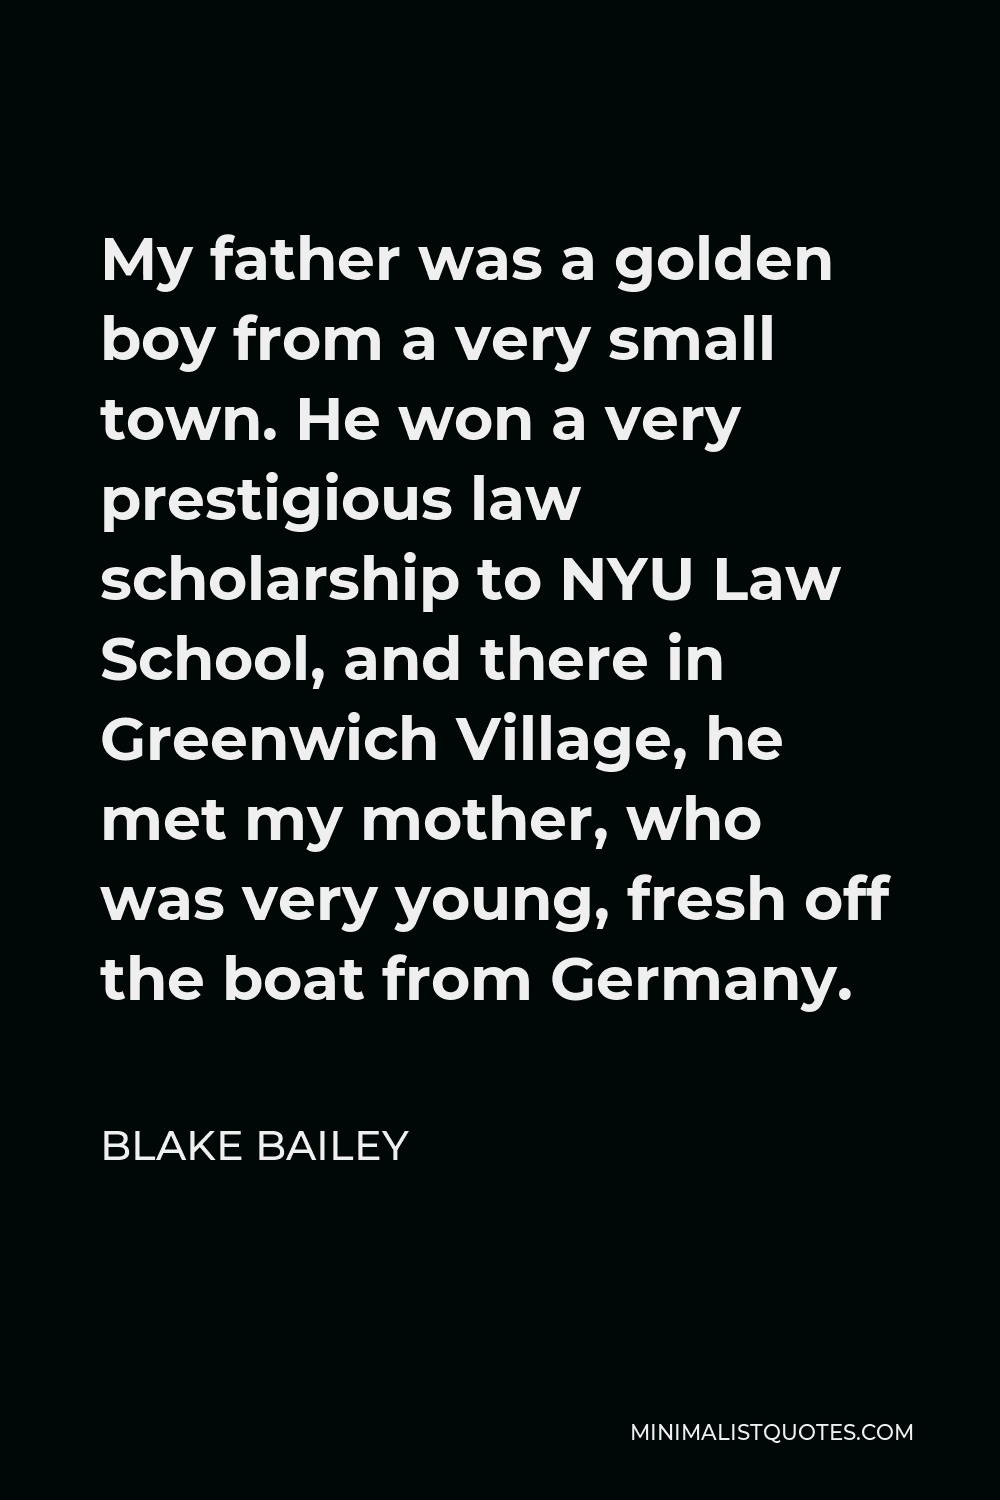 Blake Bailey Quote - My father was a golden boy from a very small town. He won a very prestigious law scholarship to NYU Law School, and there in Greenwich Village, he met my mother, who was very young, fresh off the boat from Germany.